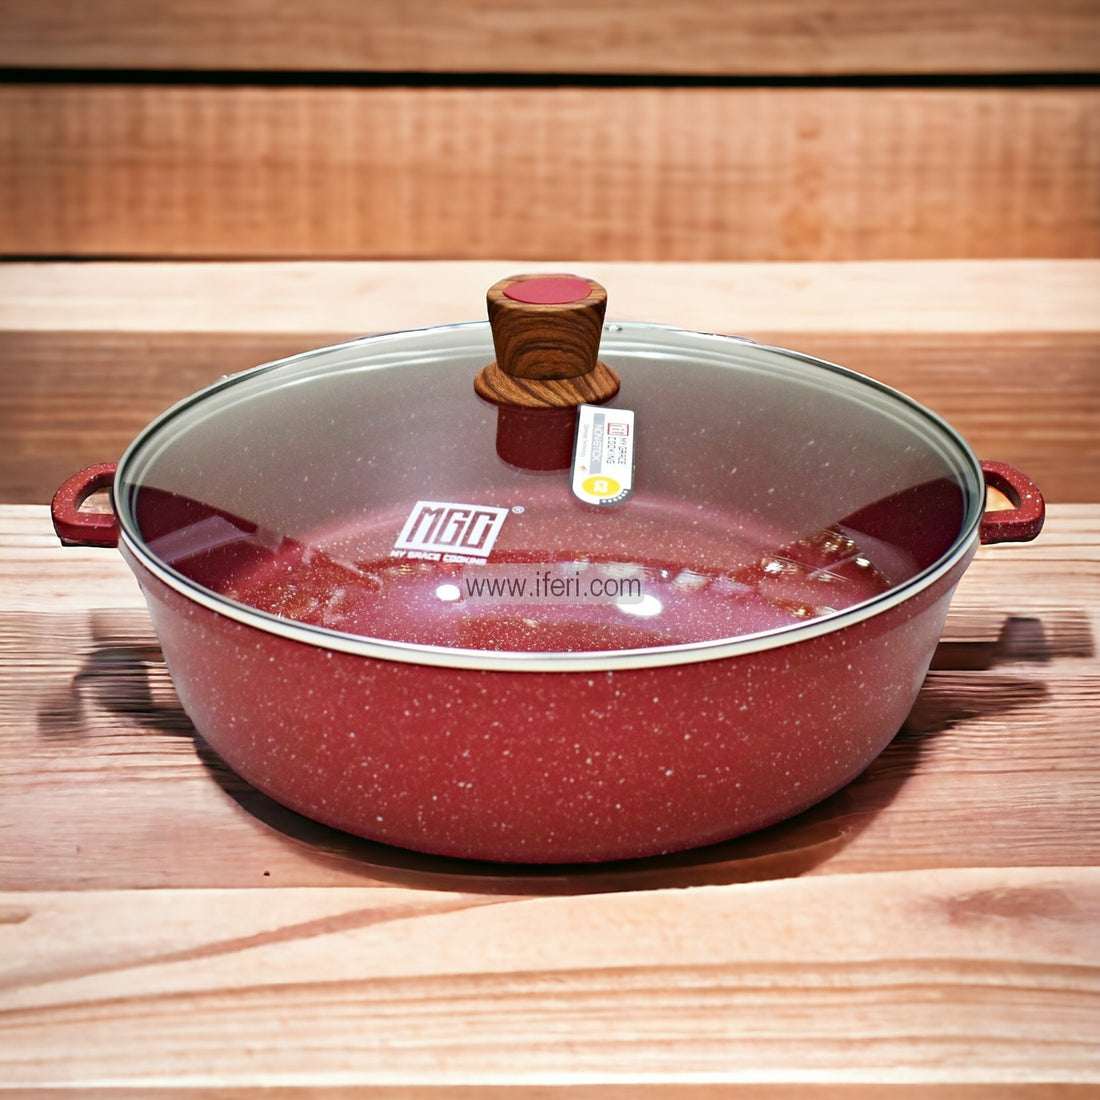 Buy MGC Non-Stick Cookware / Casserole with Lid online from iferi.com in Bangladesh.